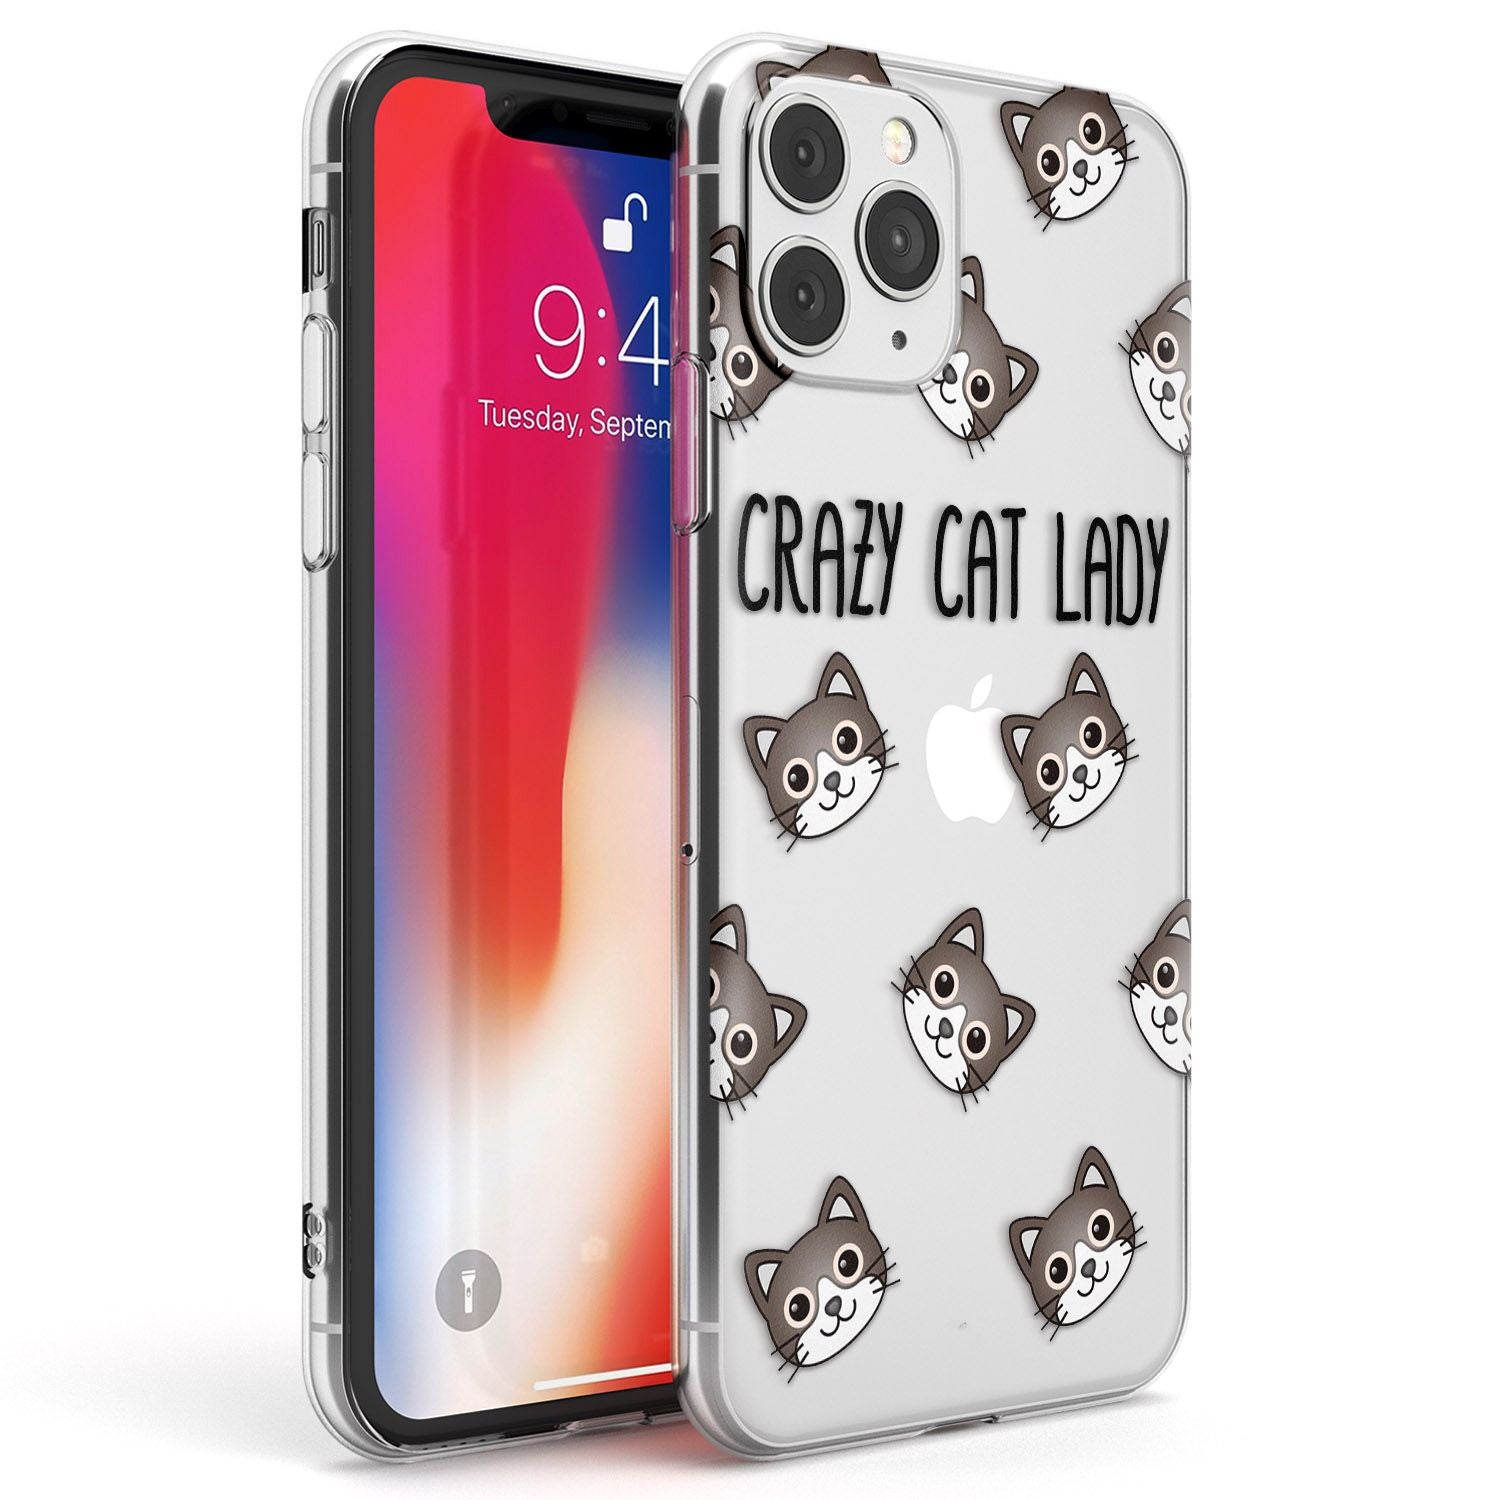 Crazy Cat Lady Phone Case iPhone 11 Pro Max / Clear Case,iPhone 11 Pro / Clear Case,iPhone 12 Pro Max / Clear Case,iPhone 12 Pro / Clear Case Blanc Space